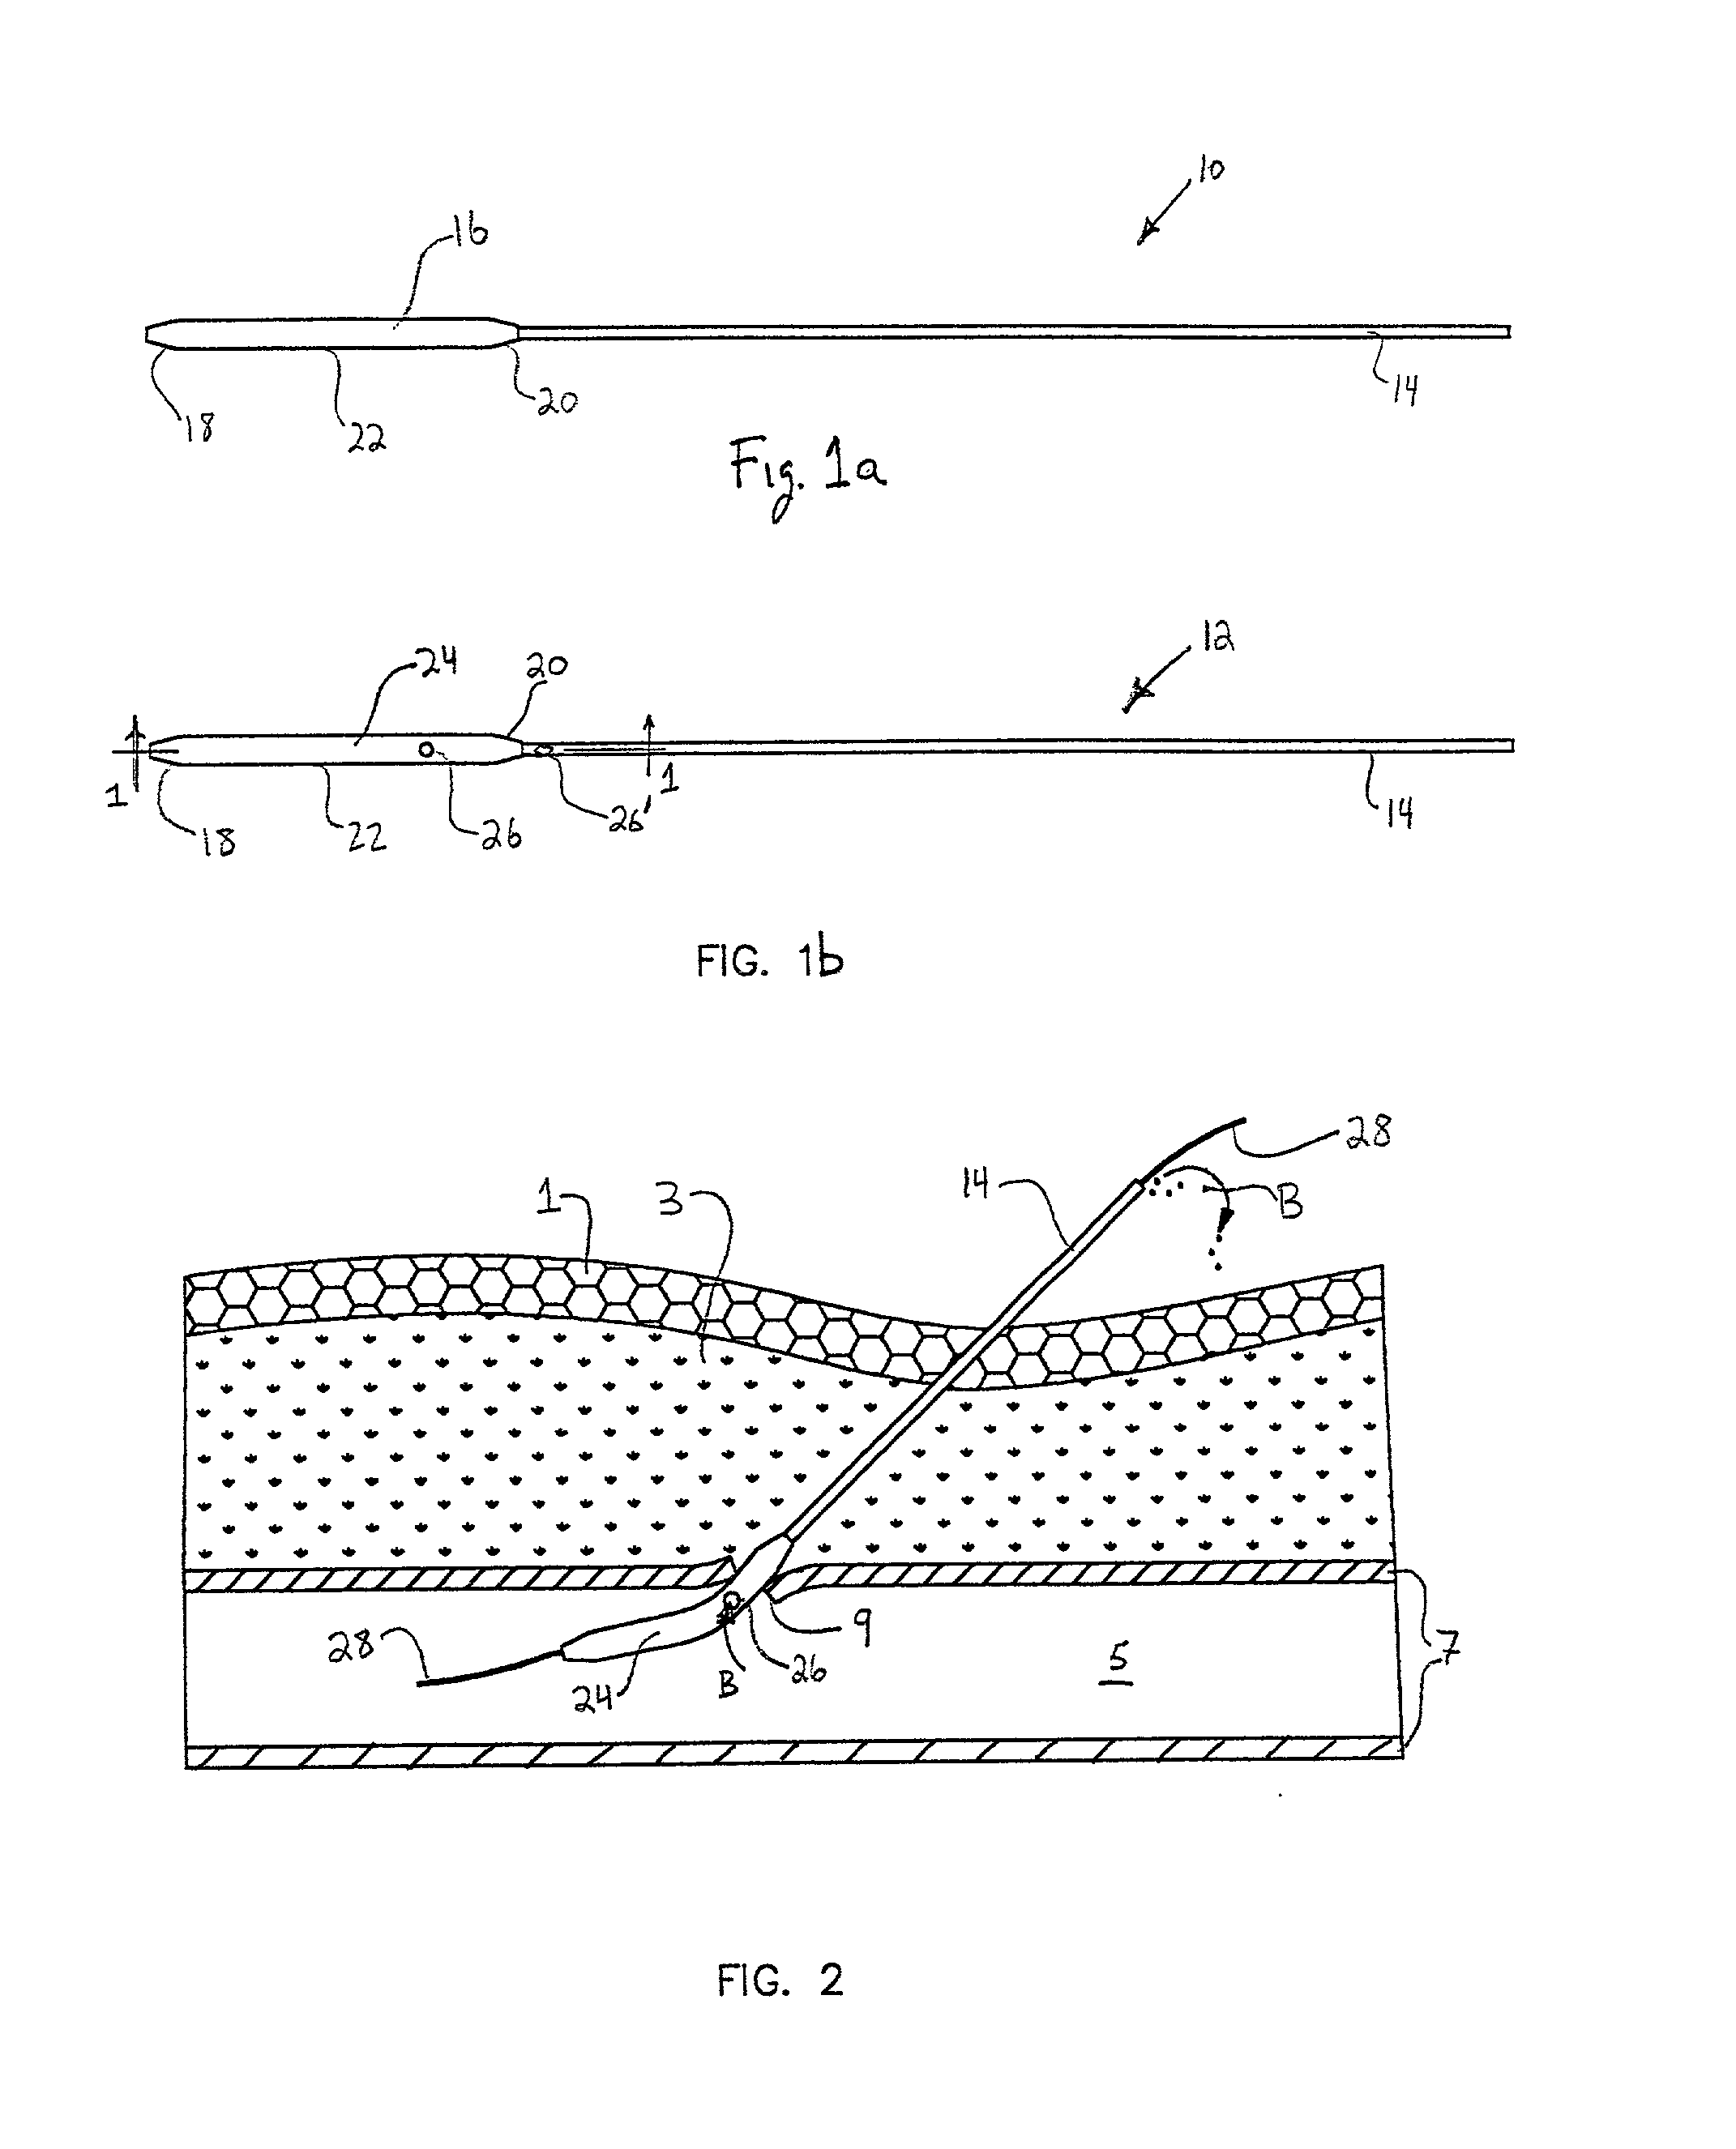 Depth and puncture control for blood vessel hemostasis system